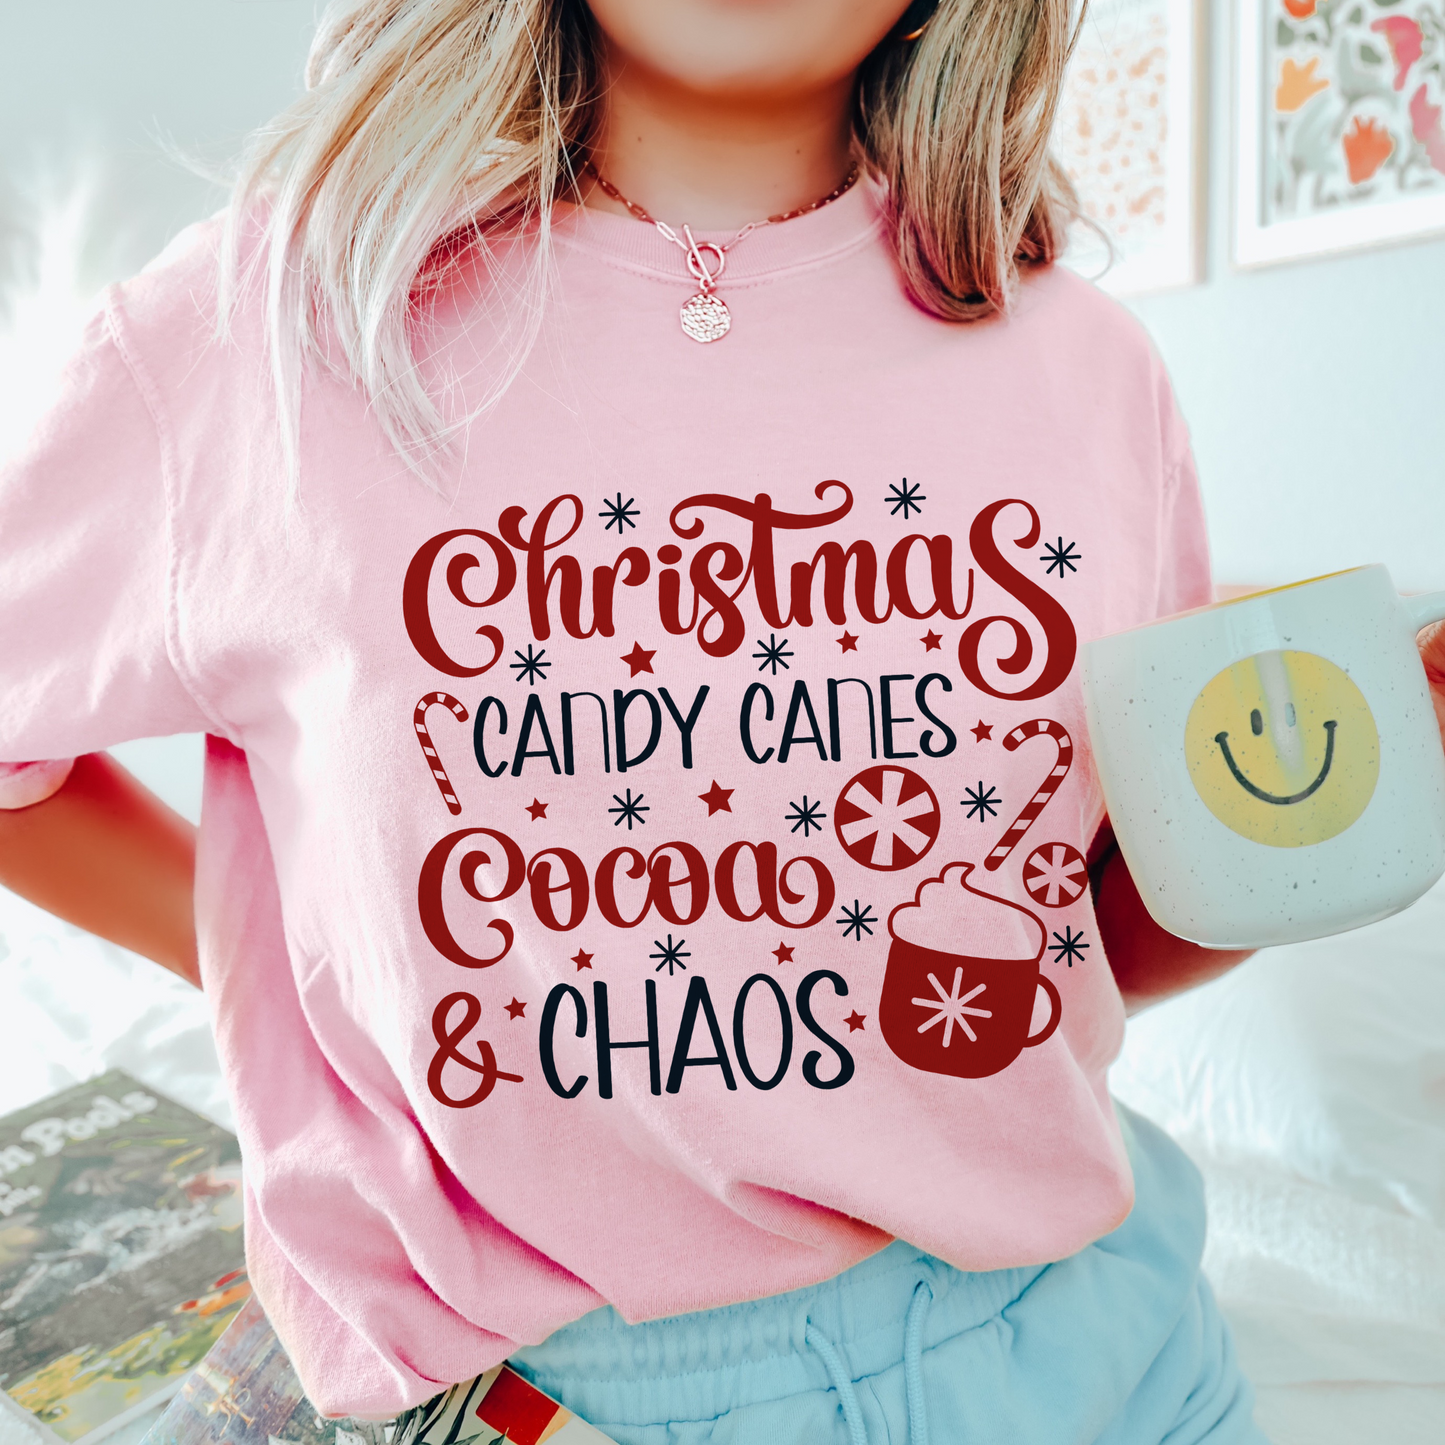 Candy canes Cocoa and Chaos Christmas t shirt